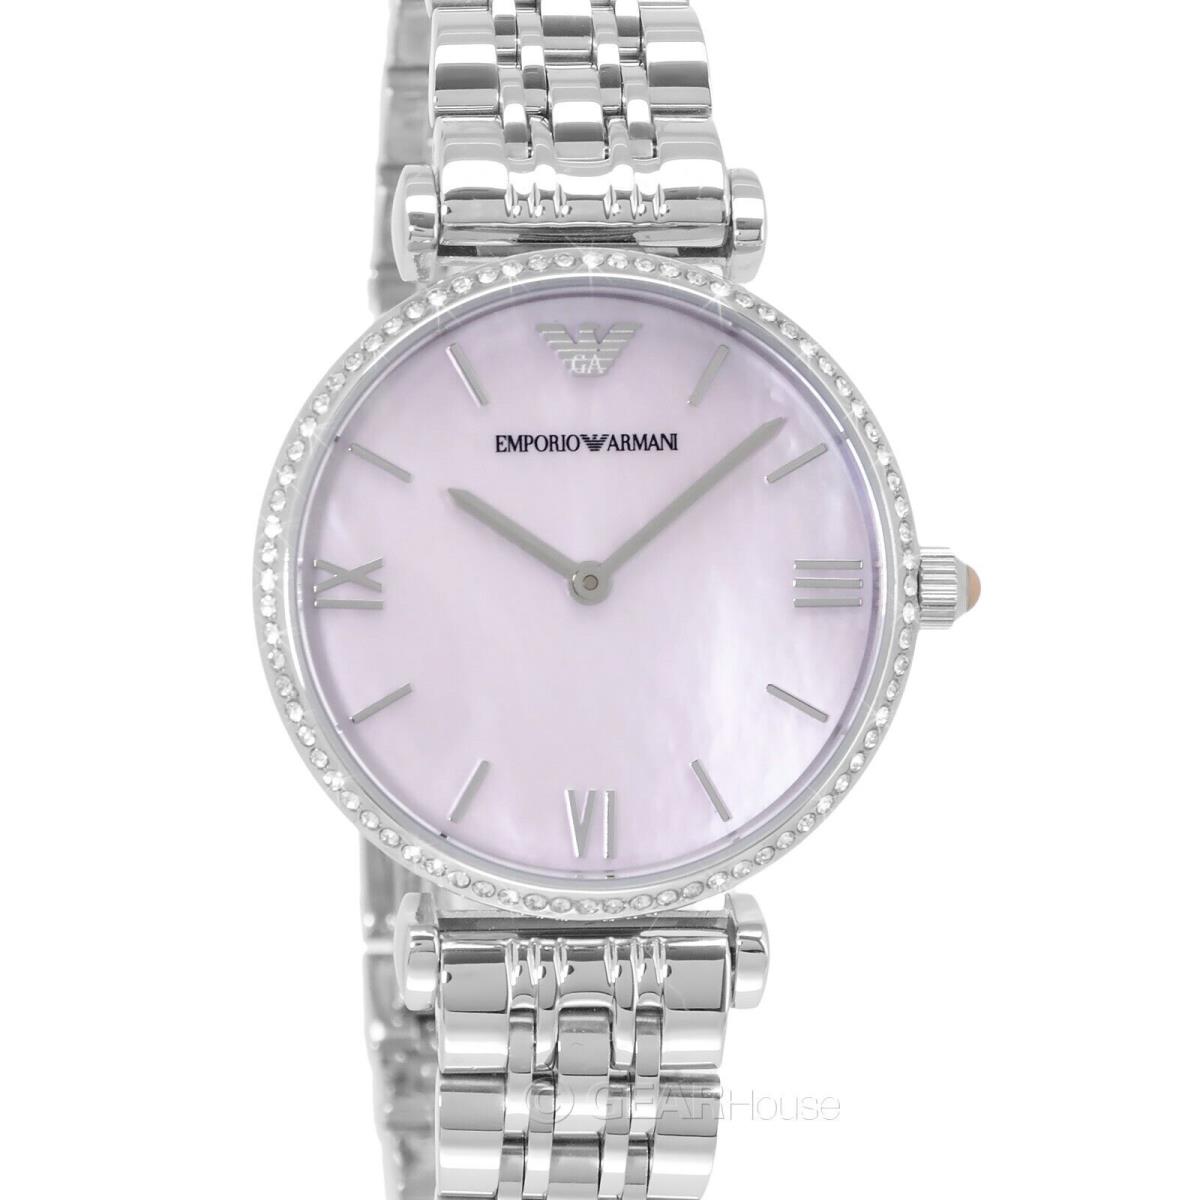 Emporio Armani Womens Dress Watch Pink Mop Dial Crystals Stainless Steel B